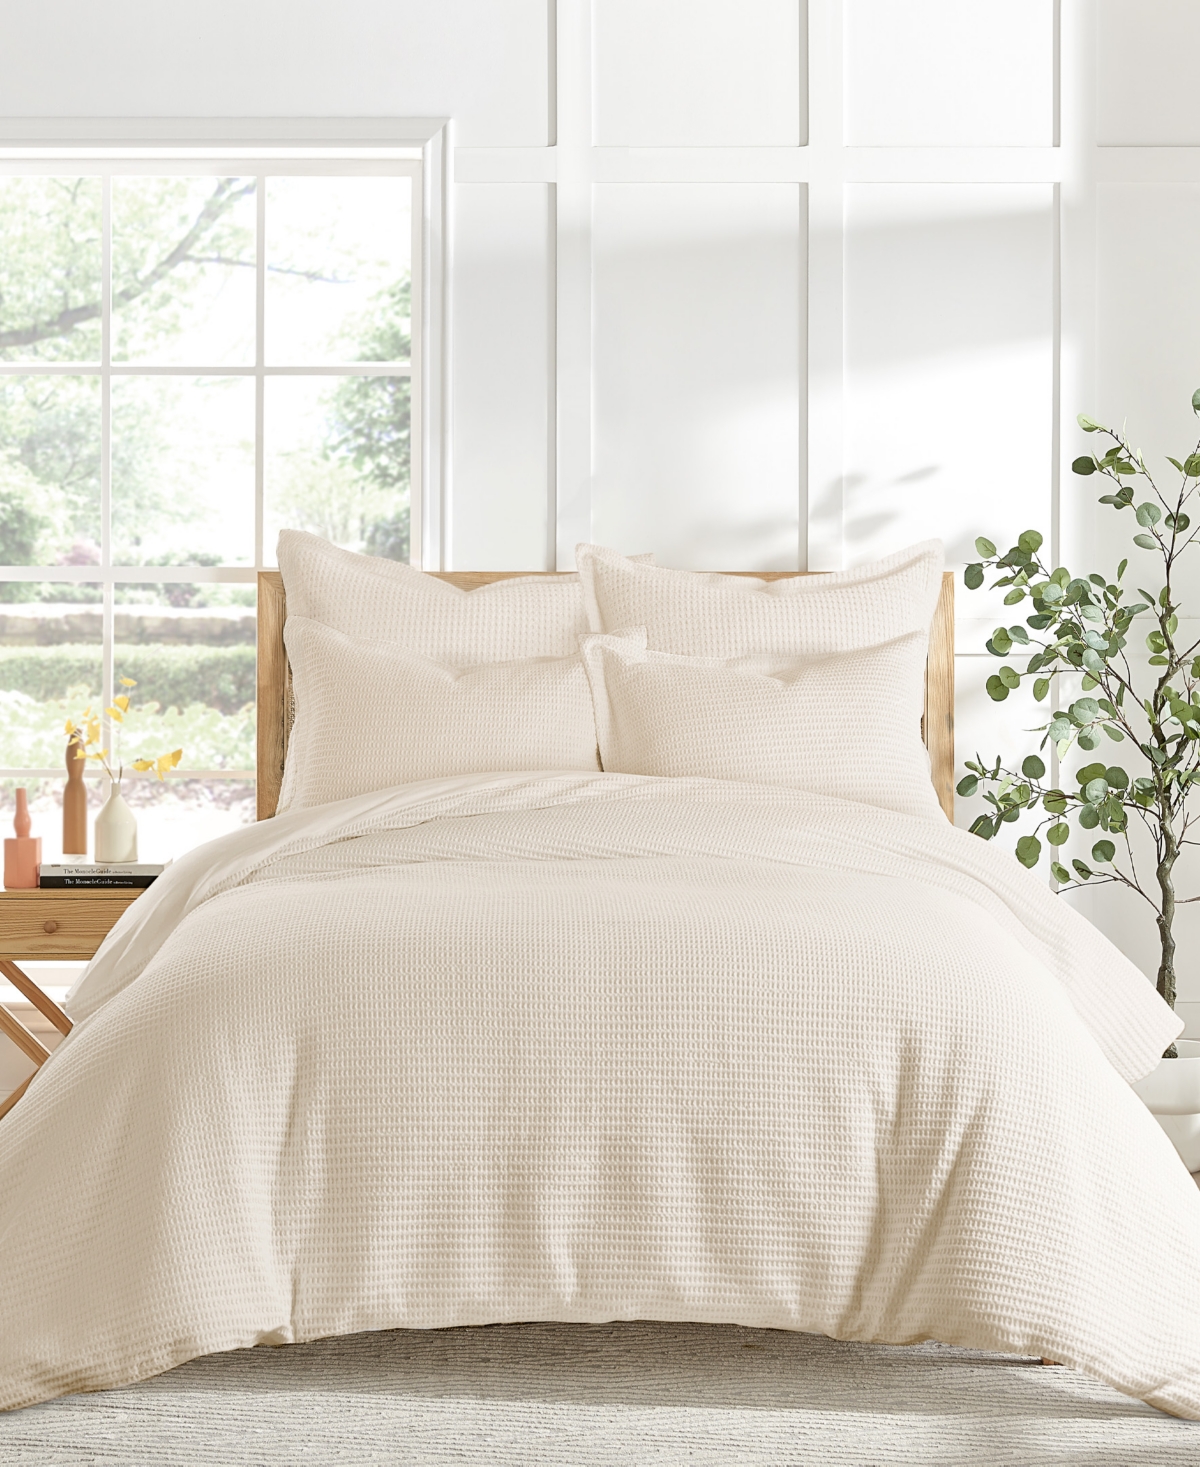 Levtex Cloud Waffle Textured 2-pc. Duvet Cover Set, Twin/twin Xl In Cream